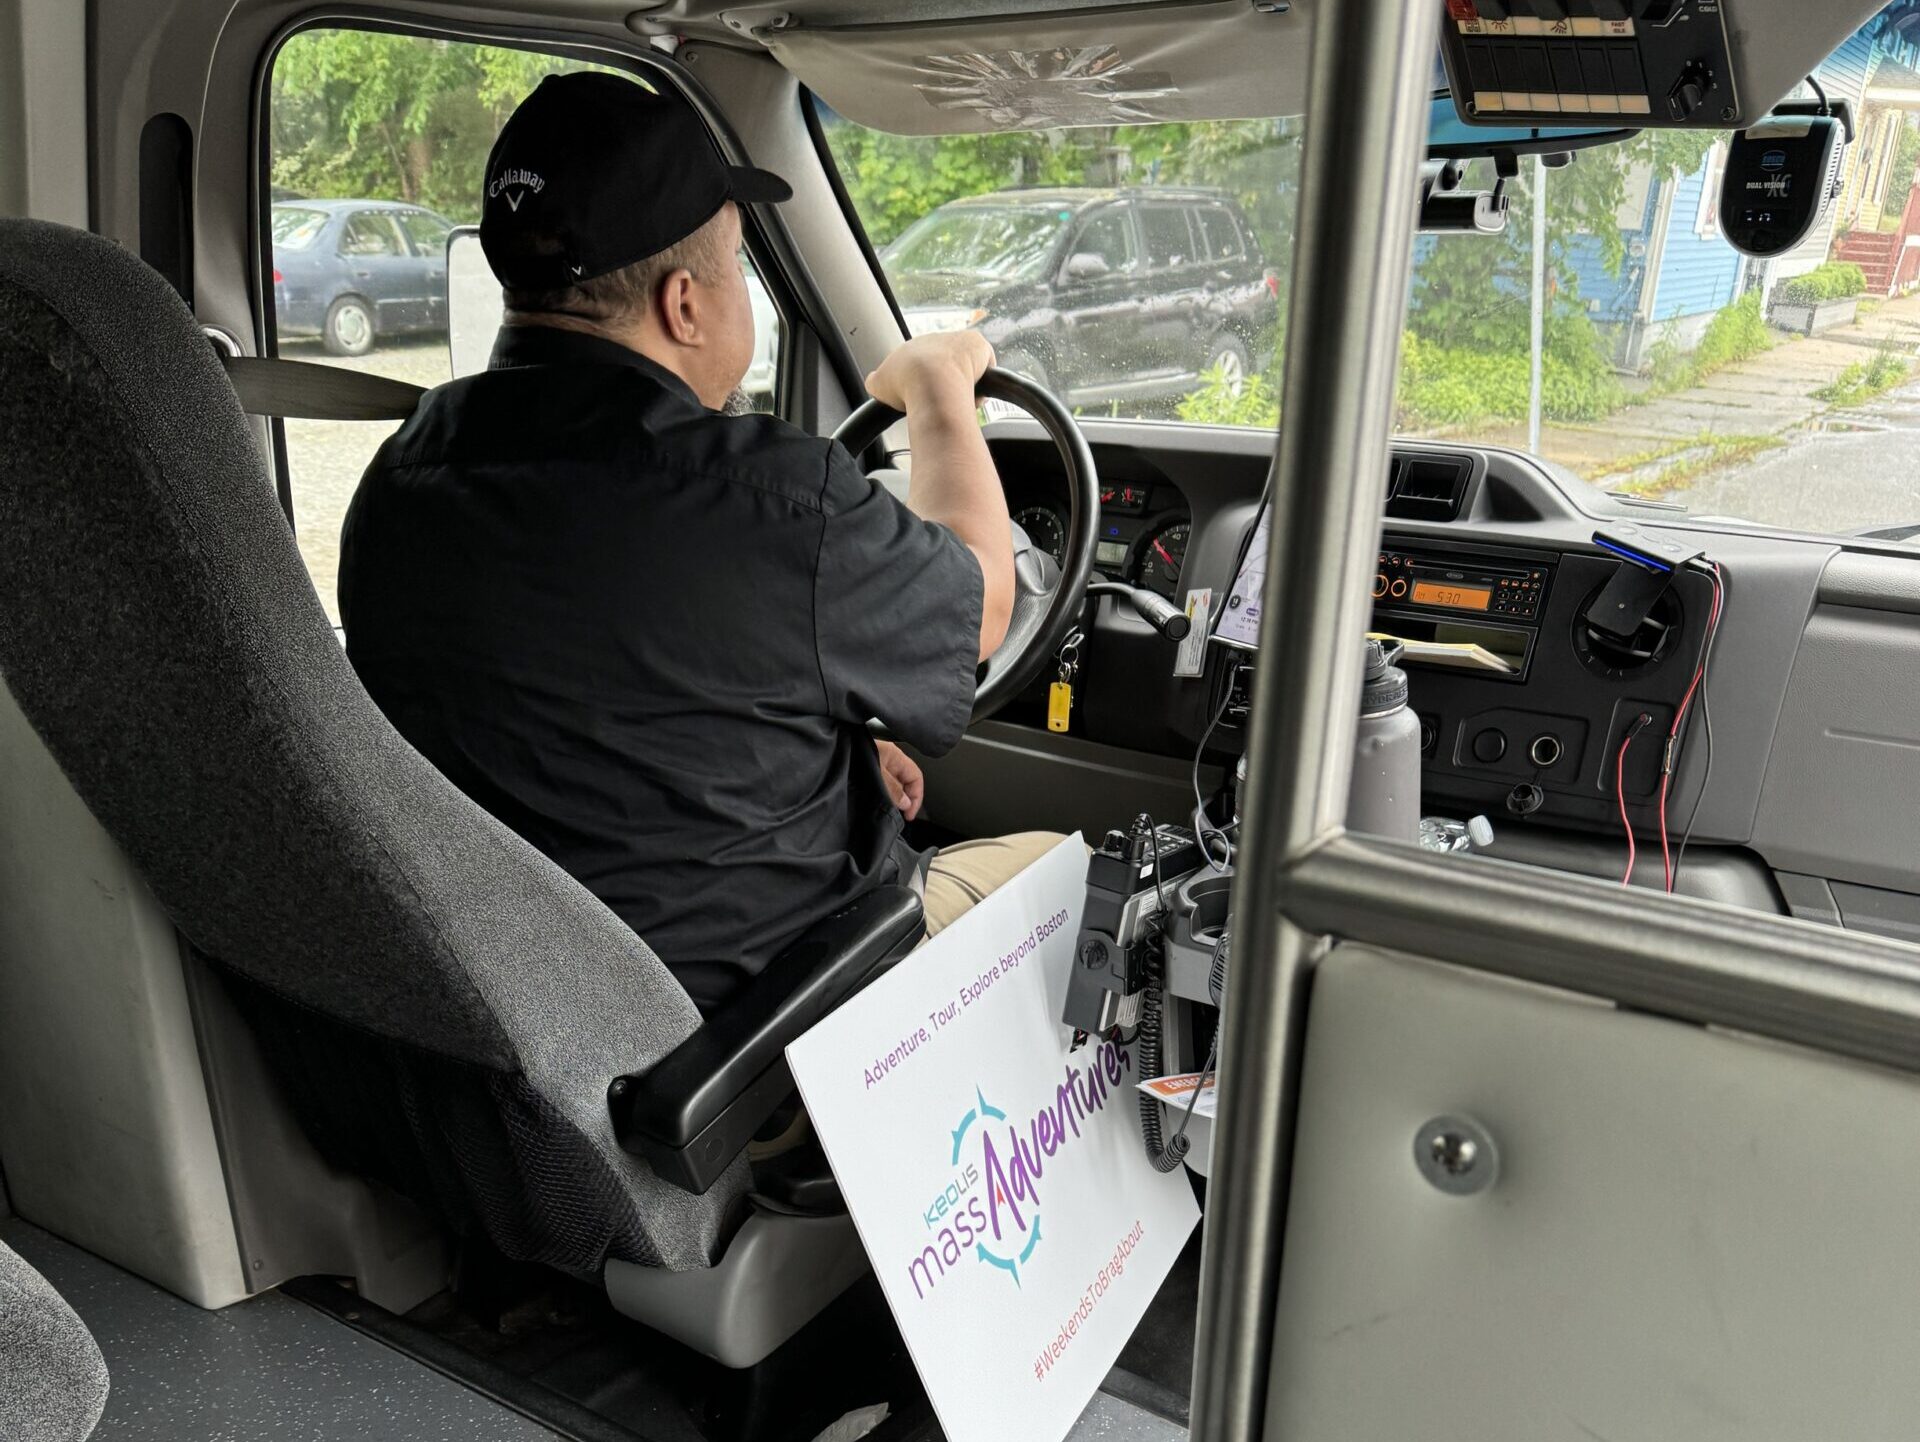 A man sits with his back to the camera in a black t-shirt and black baseball hat. He has one hand on a steering wheel, driving a bus.